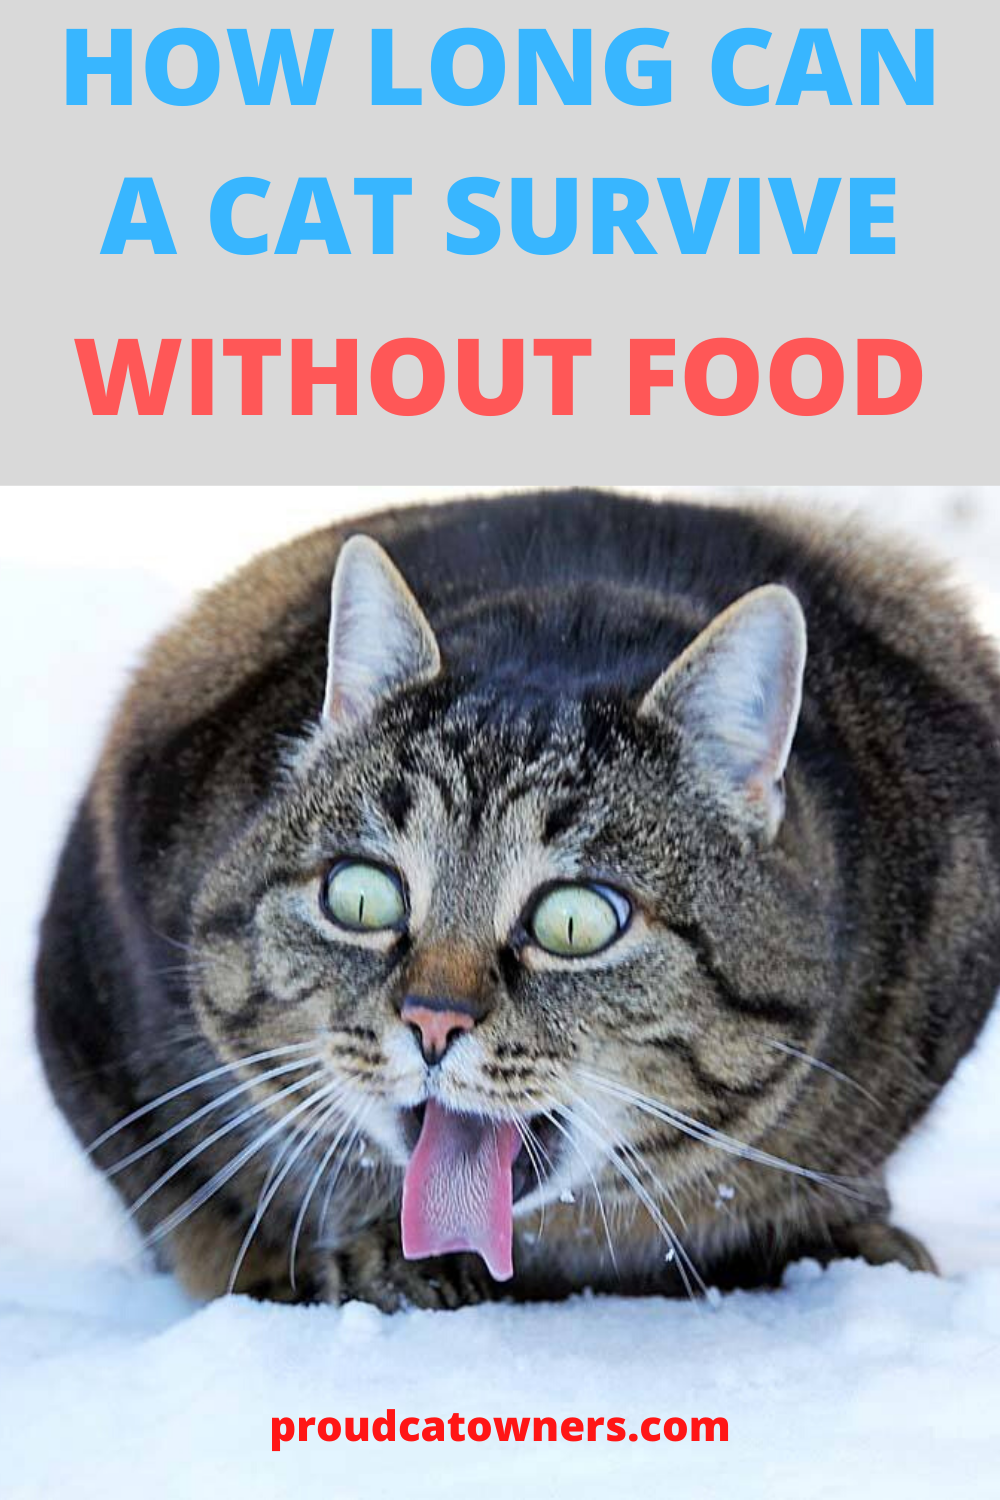 How Long Can A Cat Survive Without Food